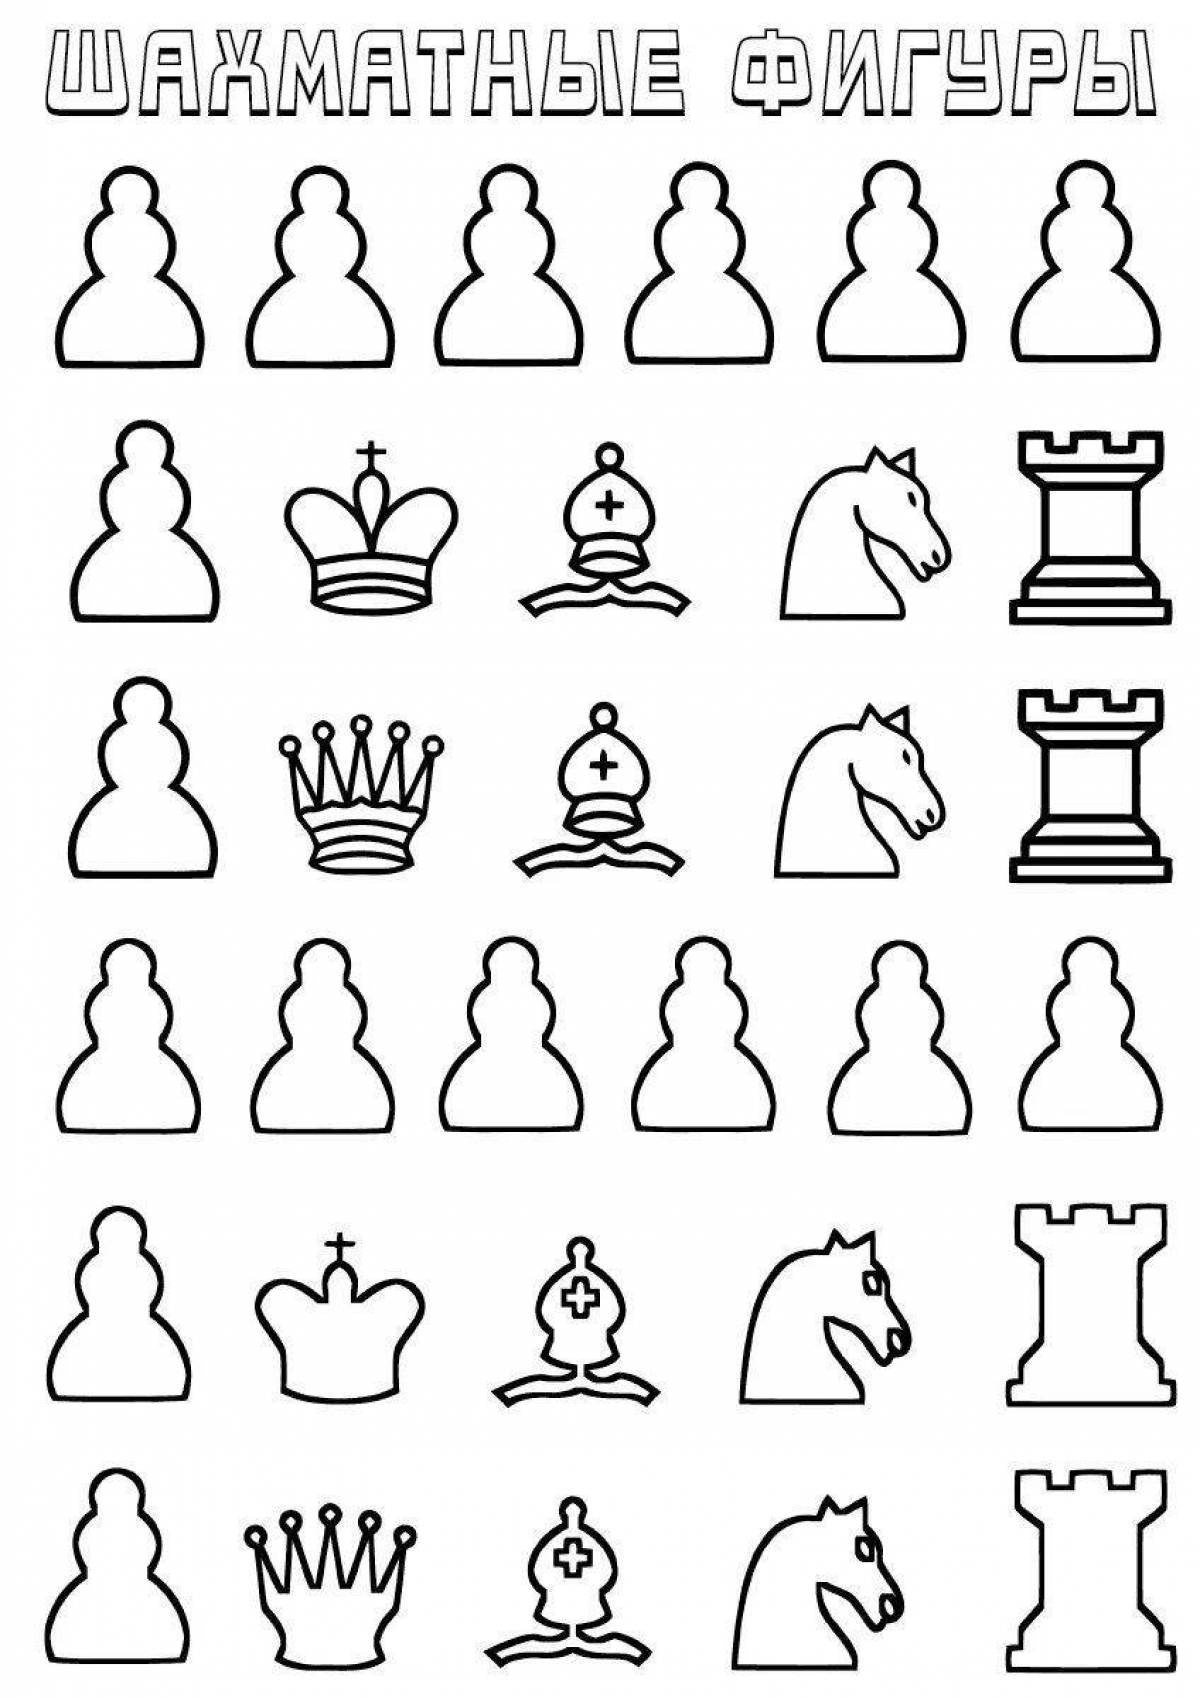 Colorful chess pieces coloring book for elementary school children